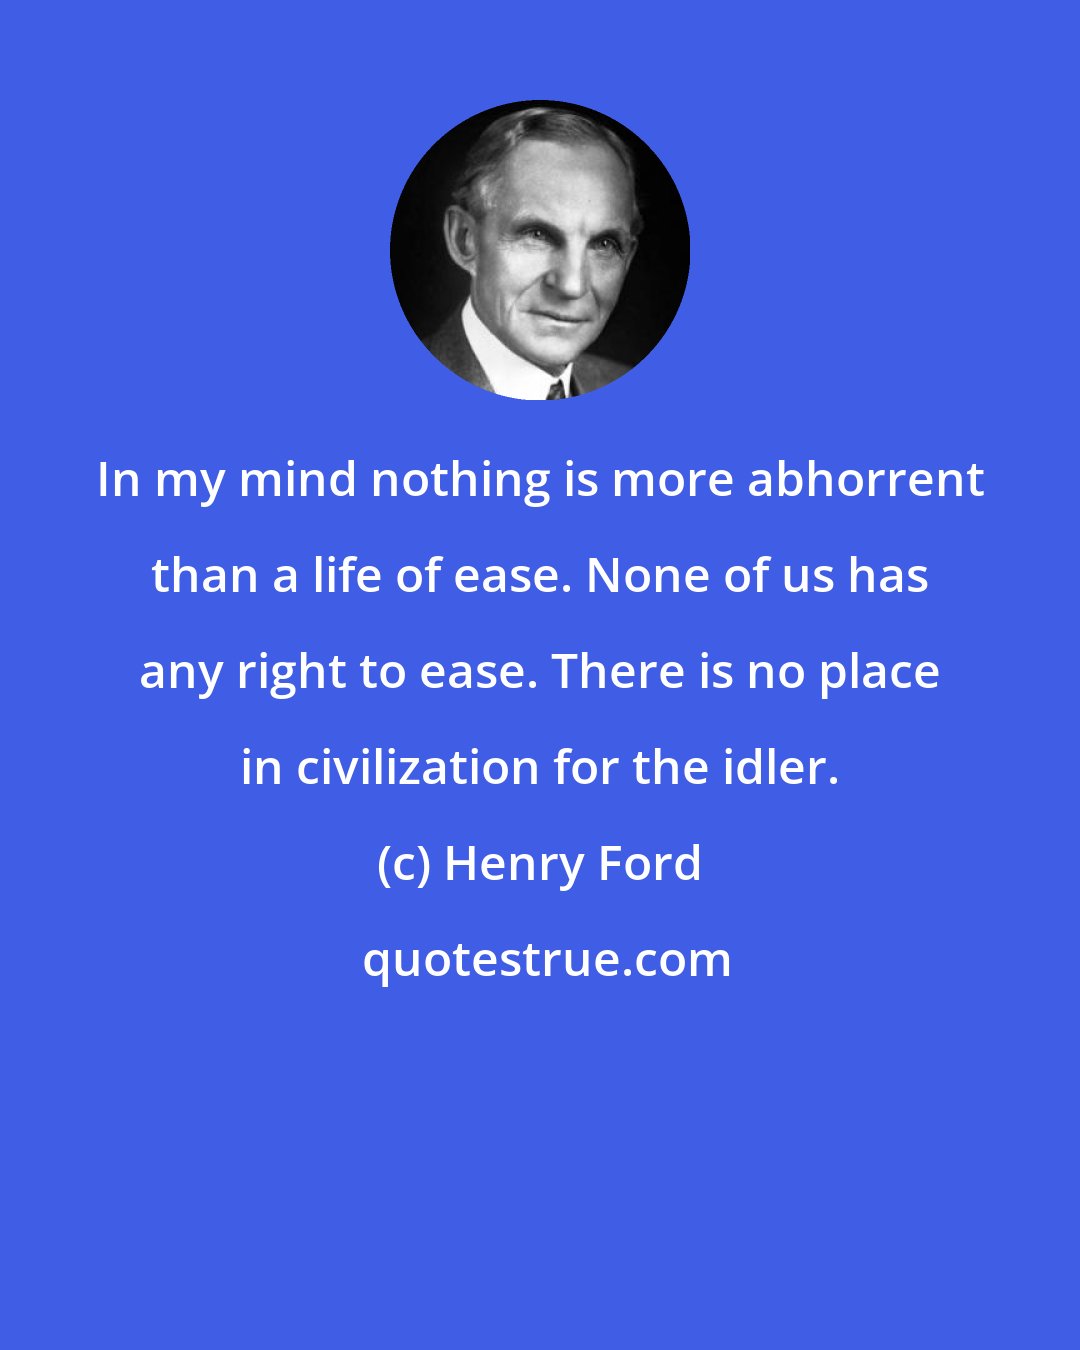 Henry Ford: In my mind nothing is more abhorrent than a life of ease. None of us has any right to ease. There is no place in civilization for the idler.